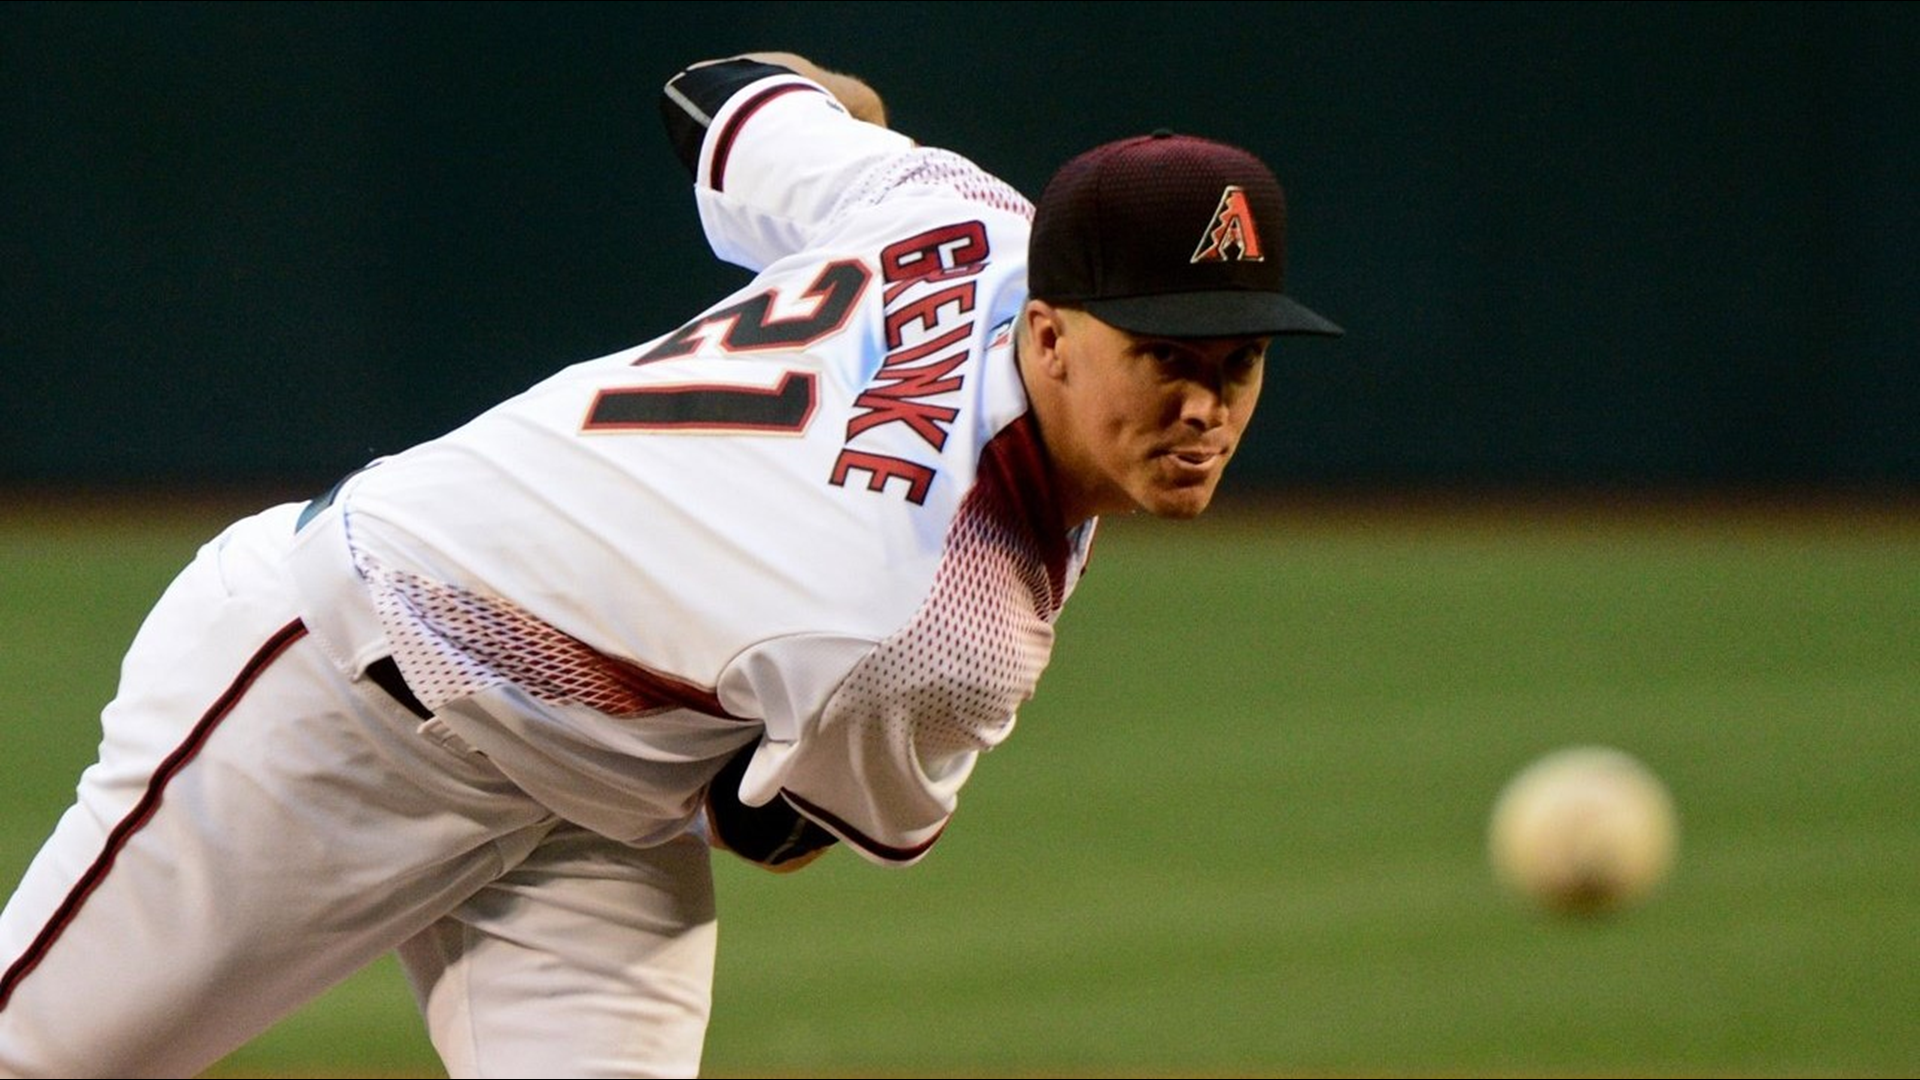 The Arizona Diamondbacks made the biggest trade of the deadline when they sent ace pitcher Zack Greinke to the Houston Astros in exchange for four prospects, including three of Houston's top five prospects. Cam and Coop discuss the Greinke trade and how it affects the team moving forward.